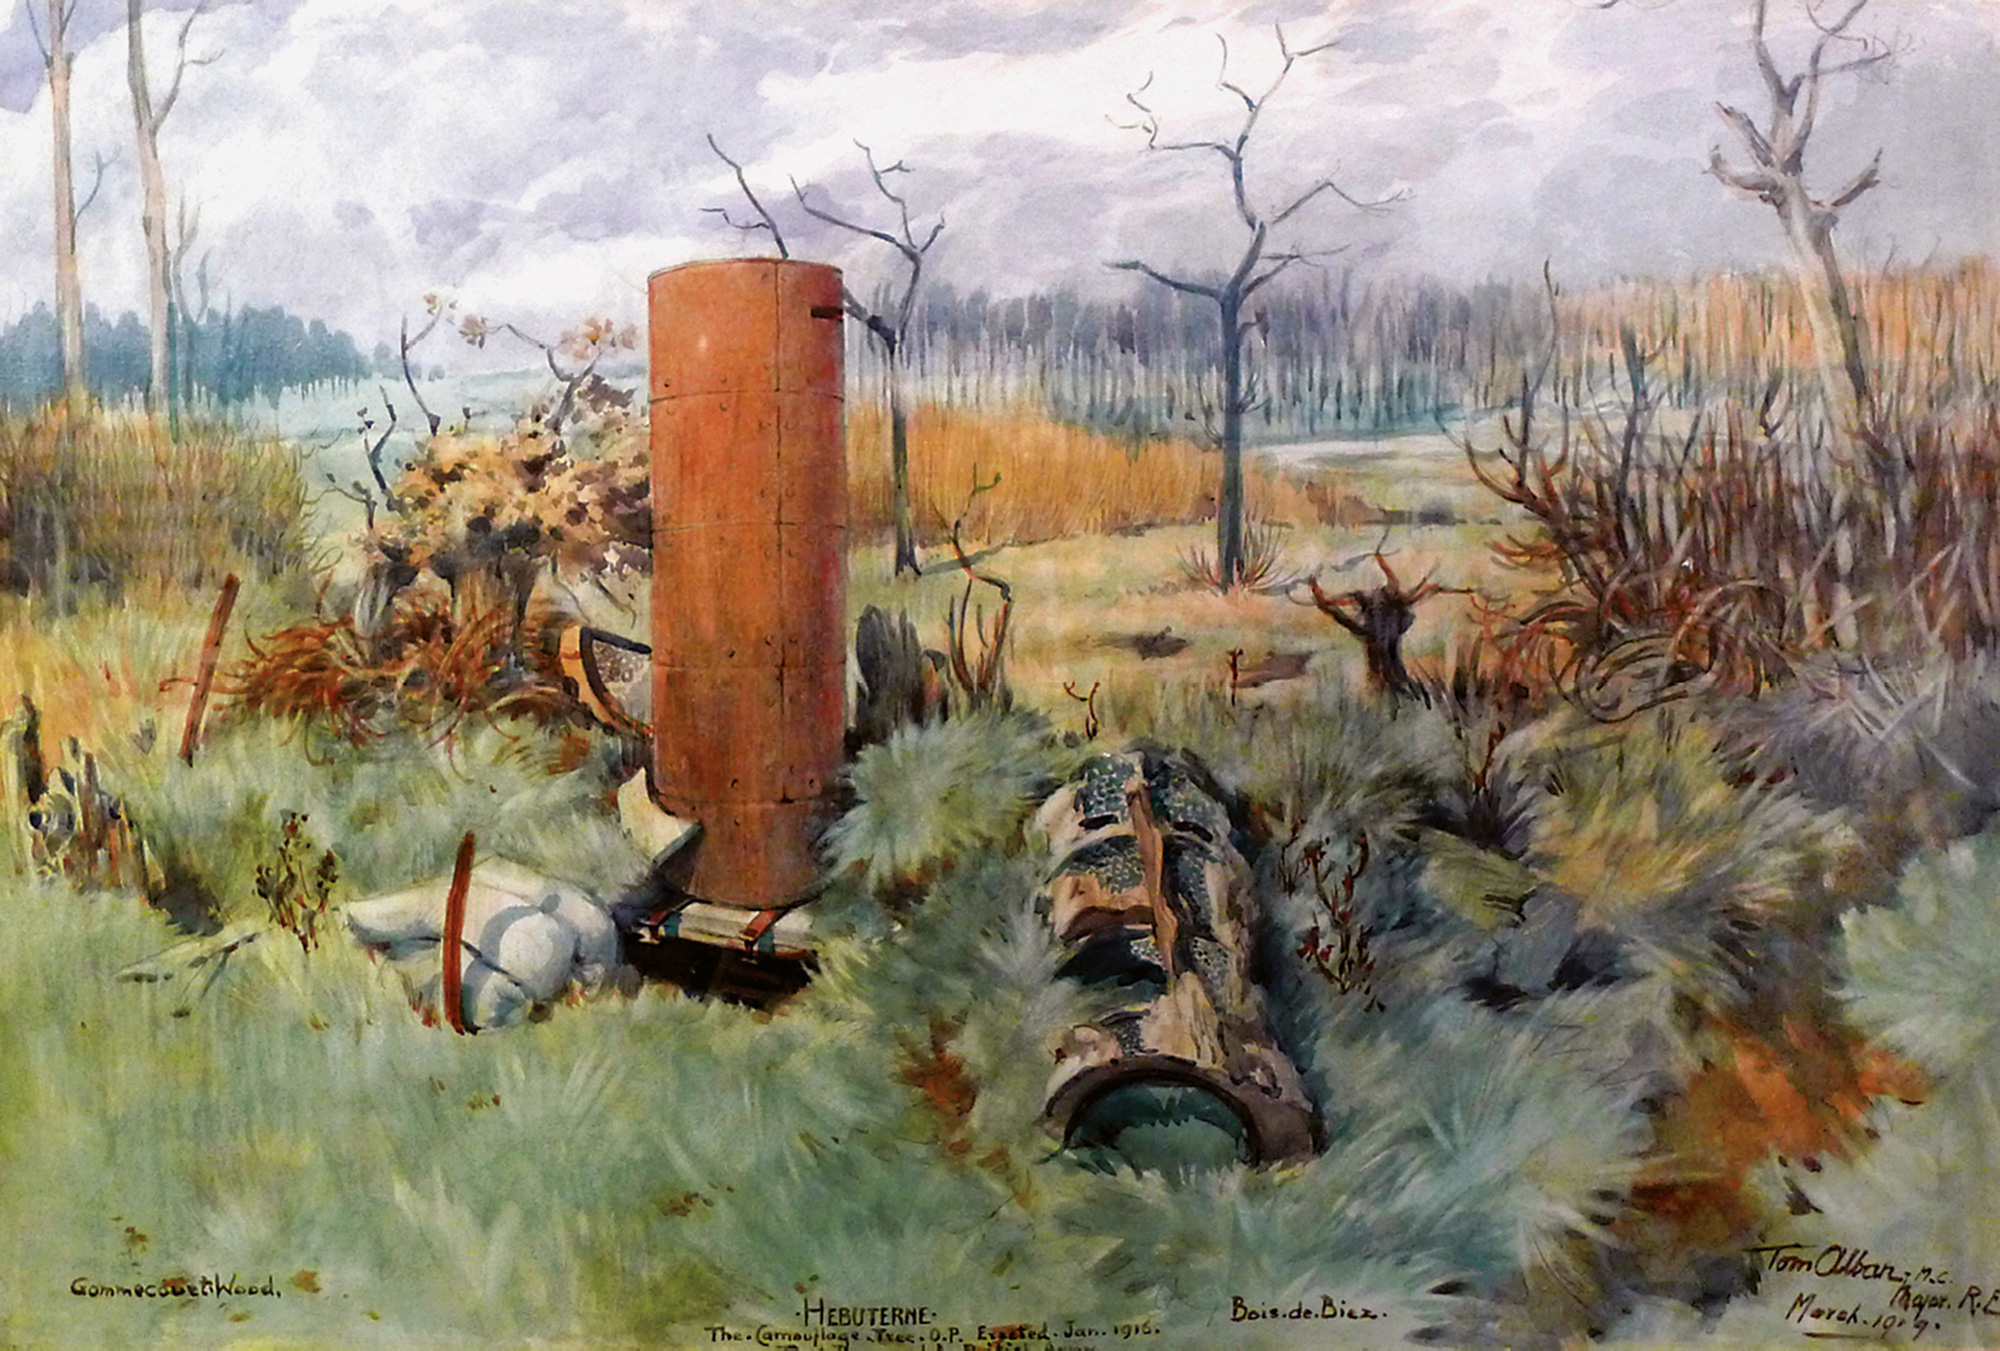 Tom Alban’s nineteen nineteen painting titled “Hebuterne. The Camouflage Tree O.P. Erected Jan 1916. First Tree Used by British Army.”